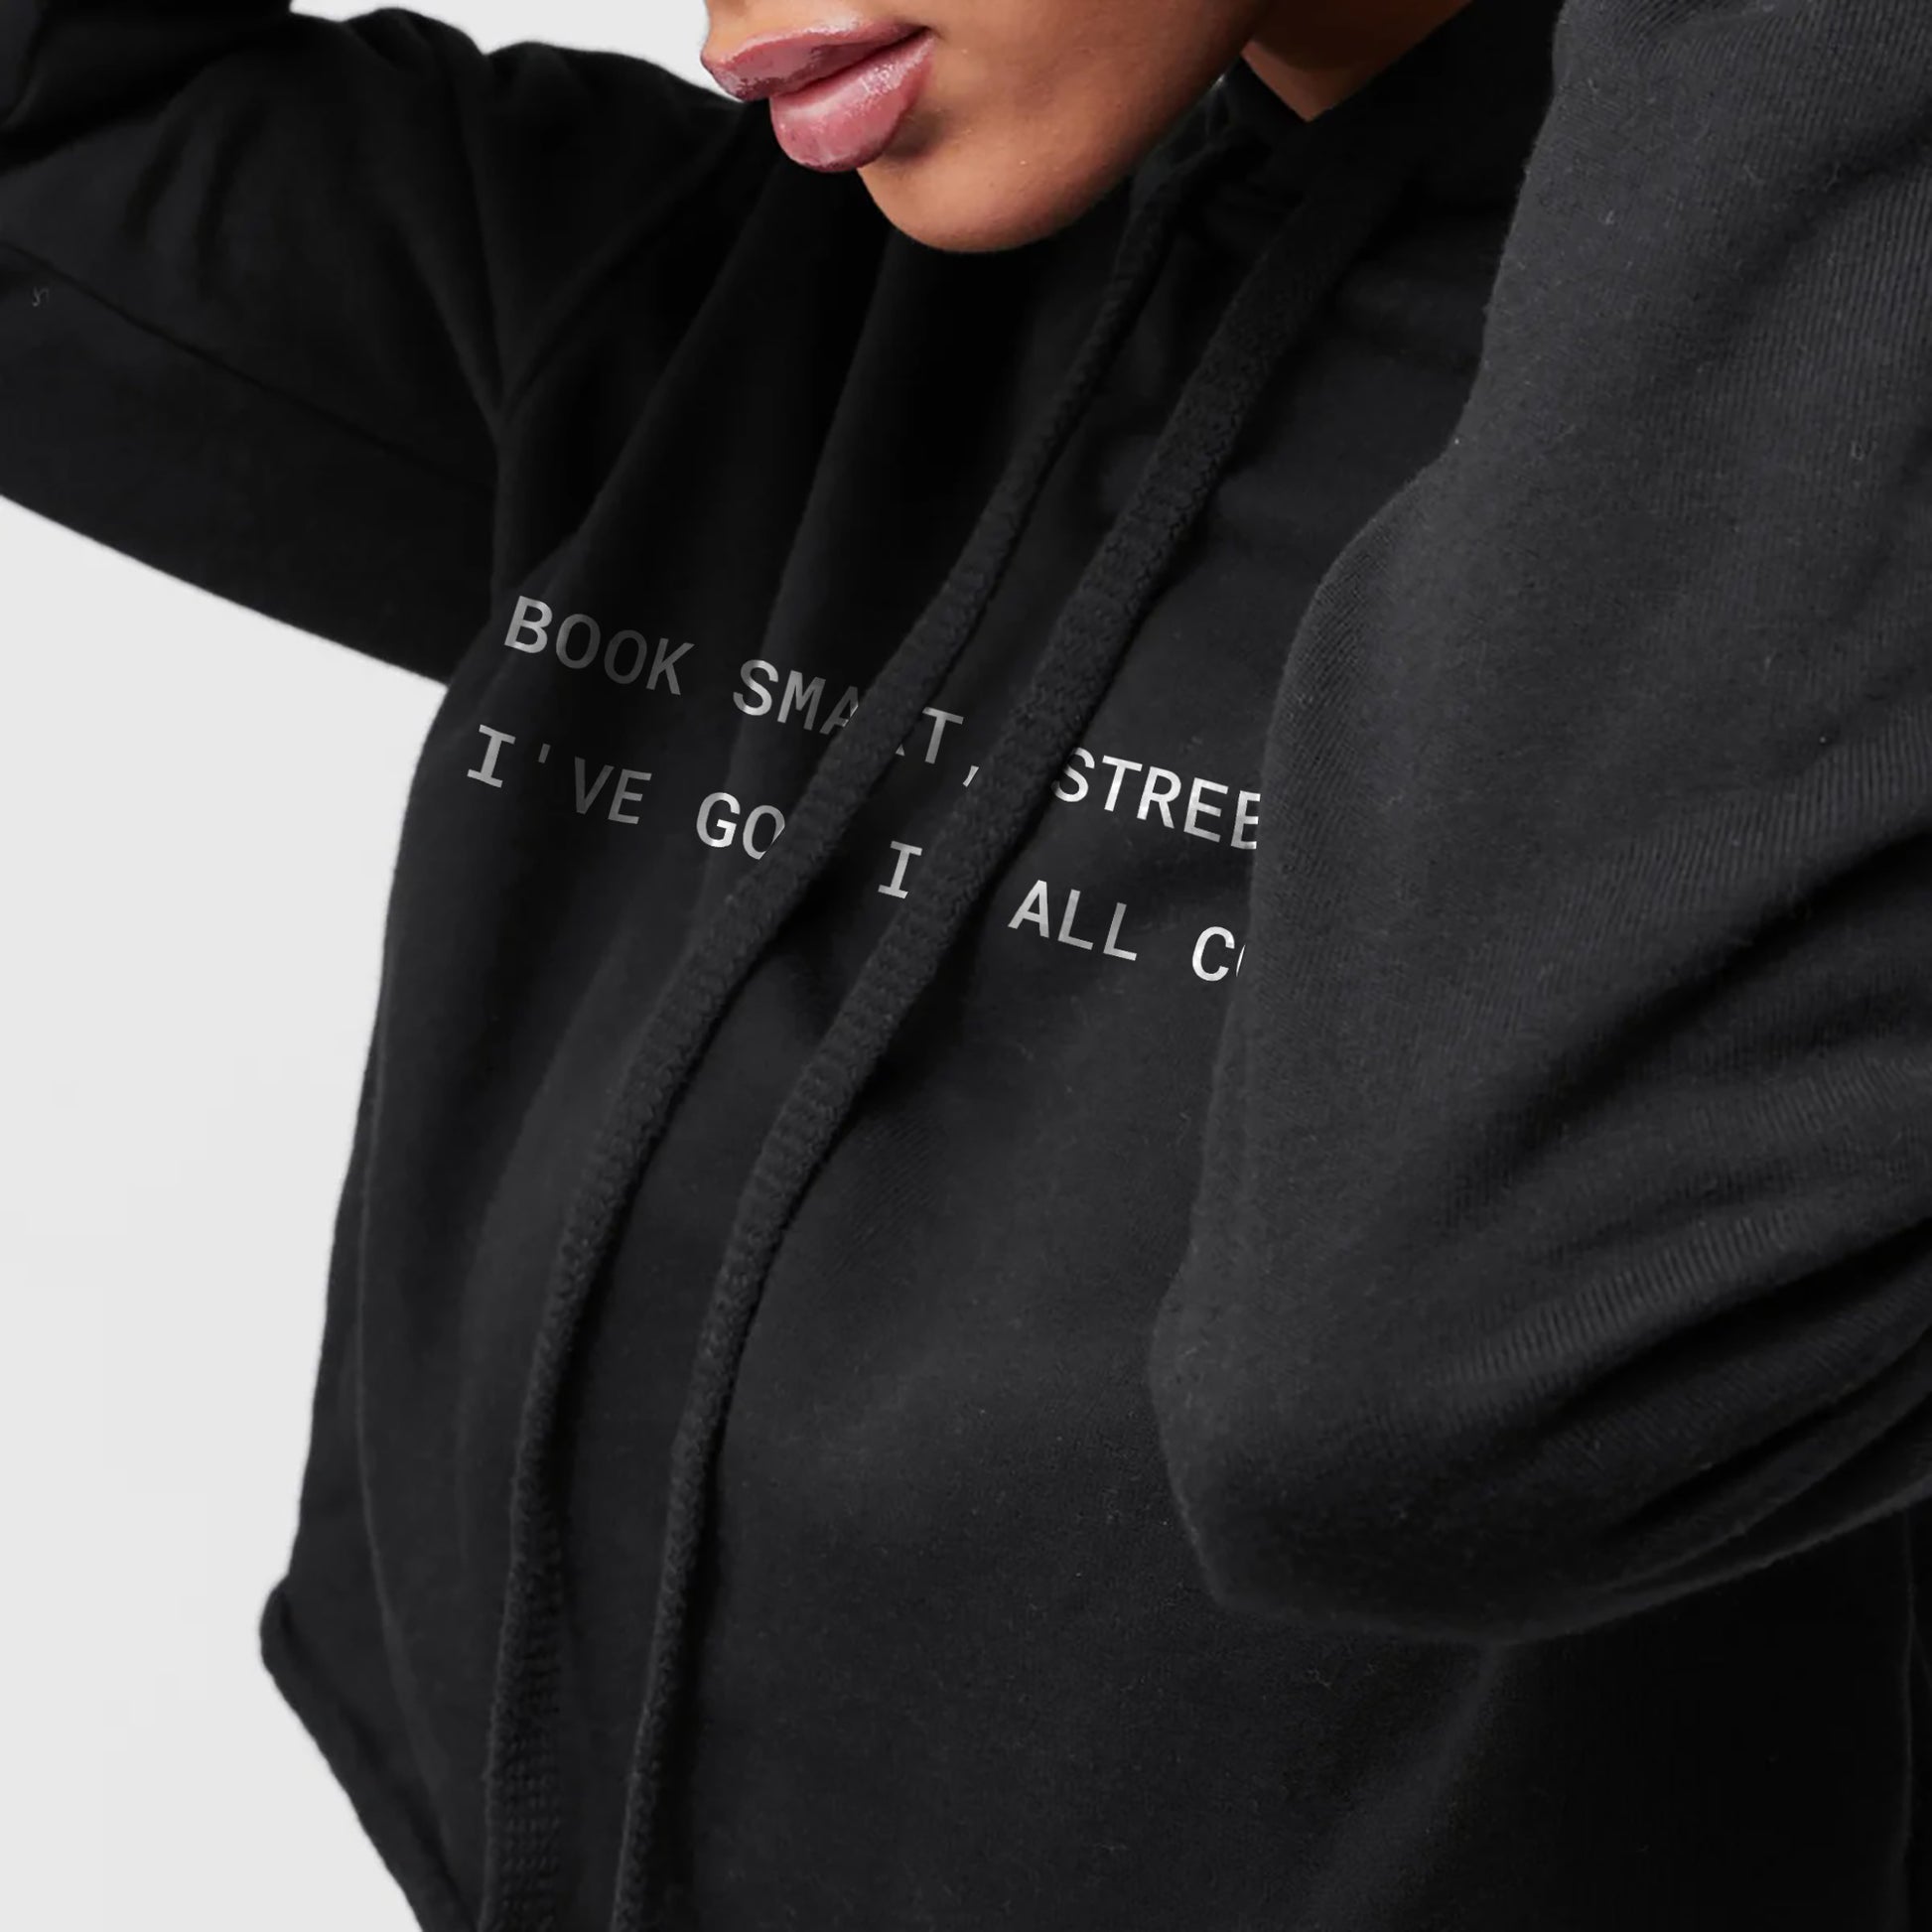 Book Smart, Street Smart, I've Got It All Covered Cropped Hoodie Solid Black Closeup Artwork and Texture